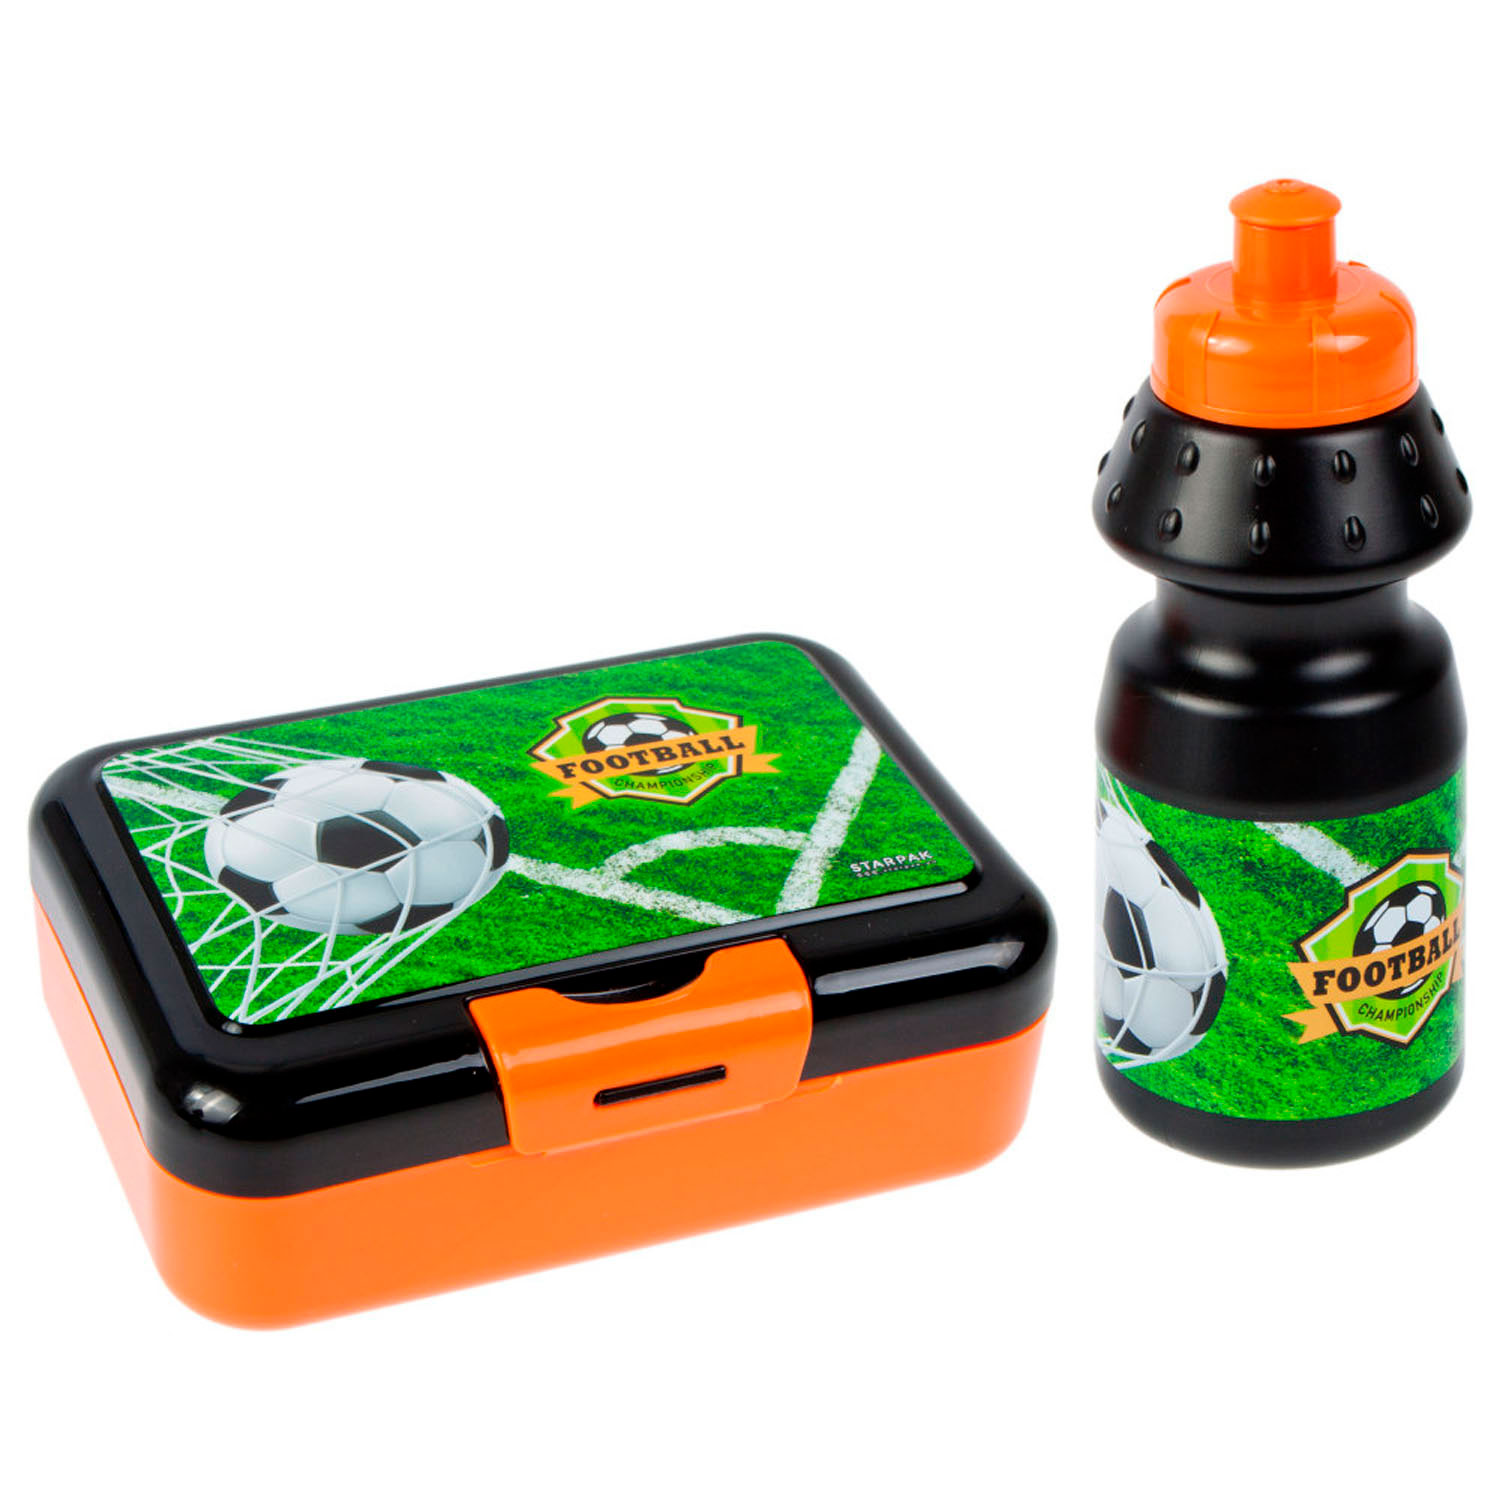 strategie boeket Streven Lunchbox with Football Drinking Bottle | Thimble Toys